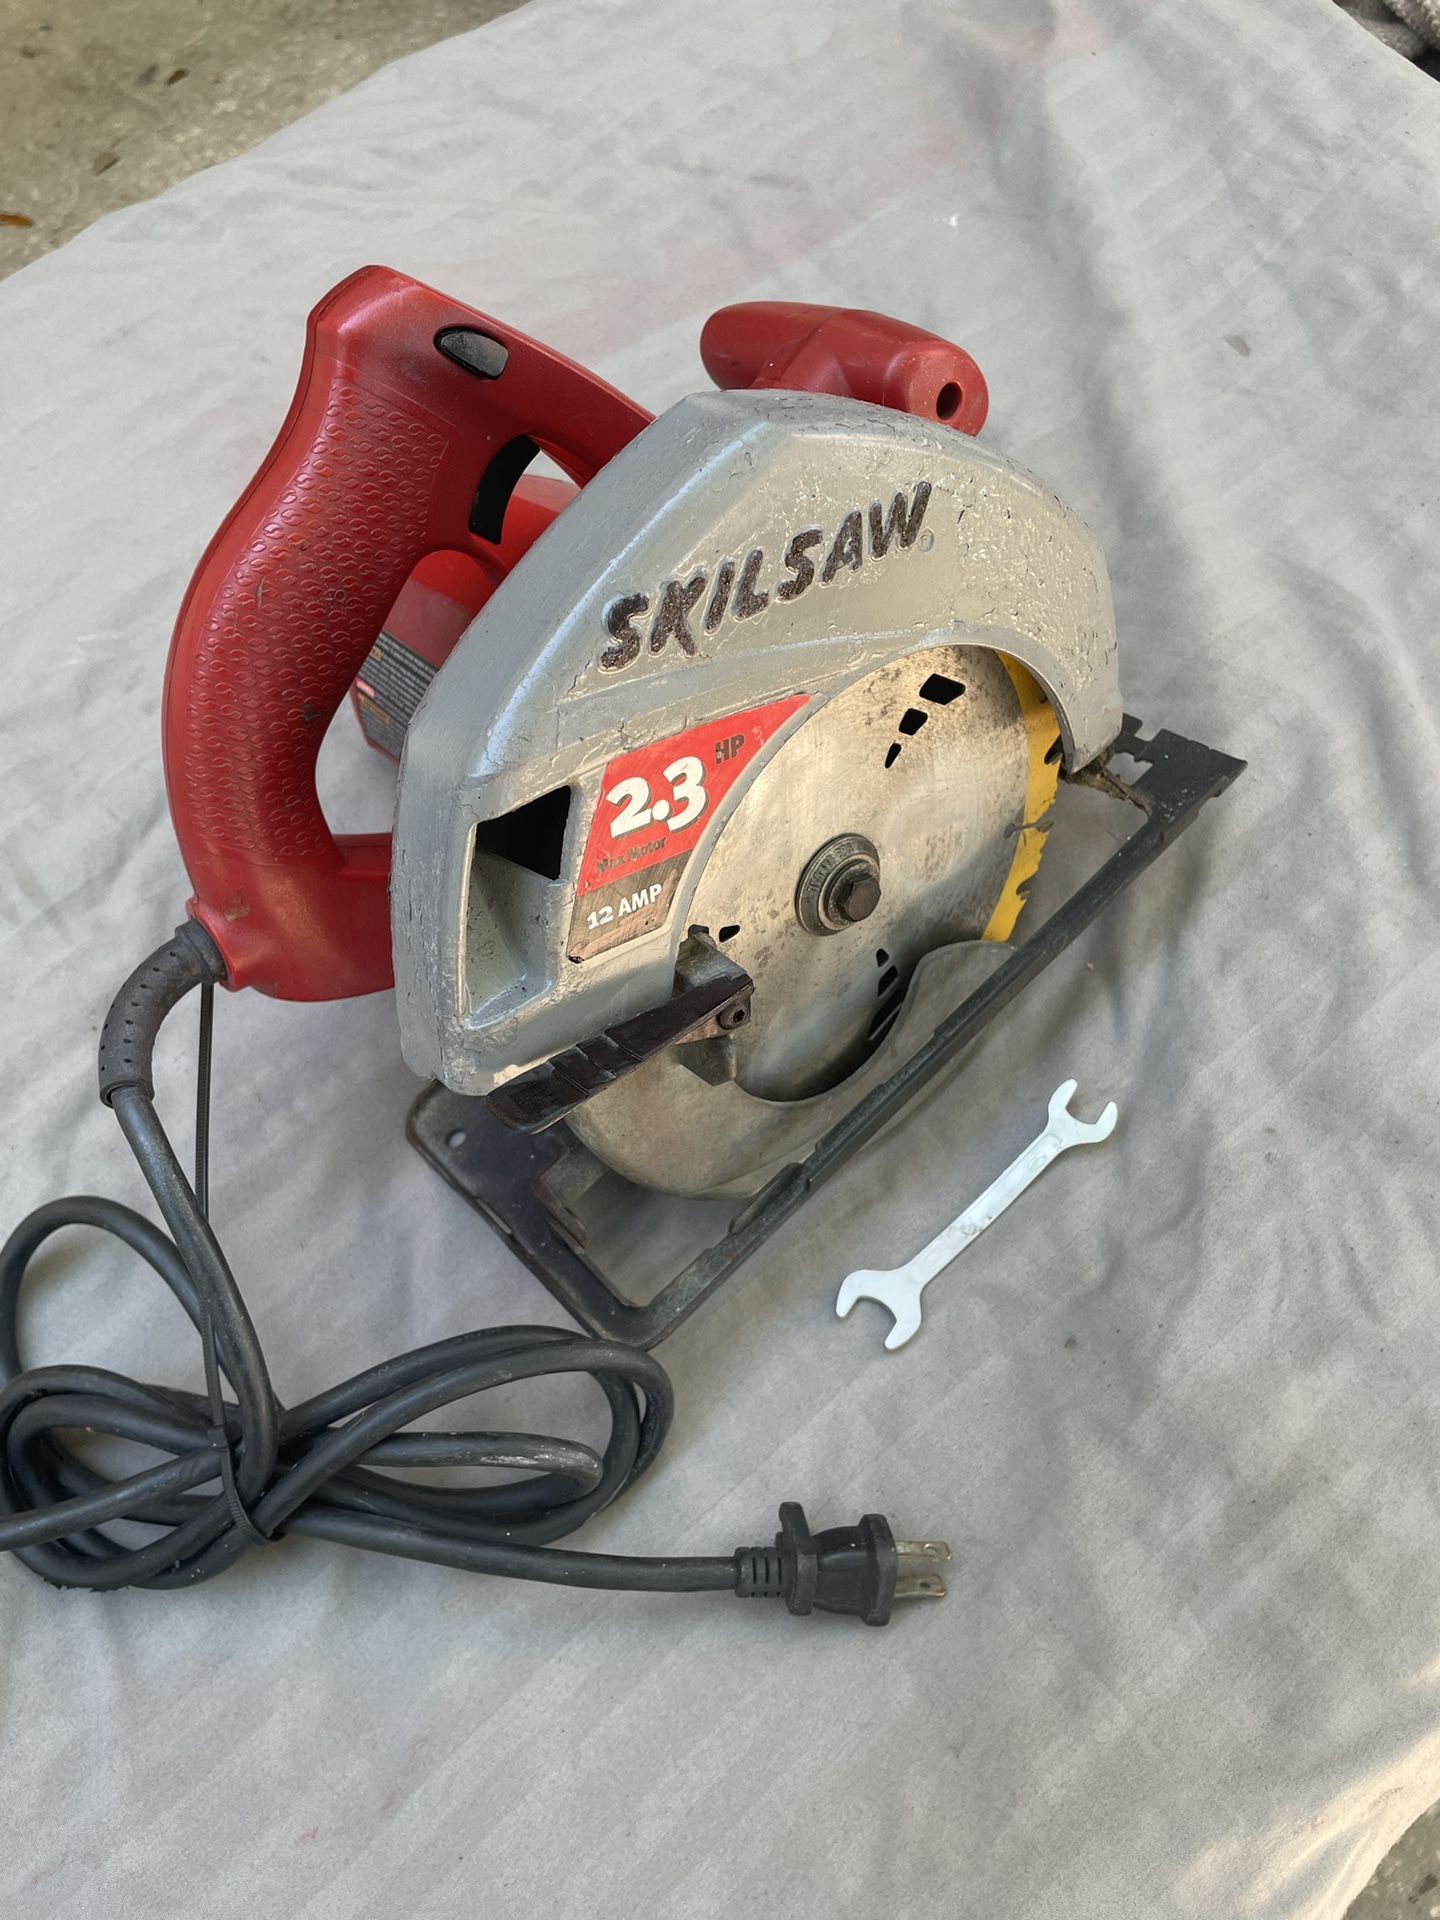 Skilsaw 5400–2.3hp, 12 Amp, 7 1/4" Blade,  Circ.Saw. 6’ Cord,  Wrench.